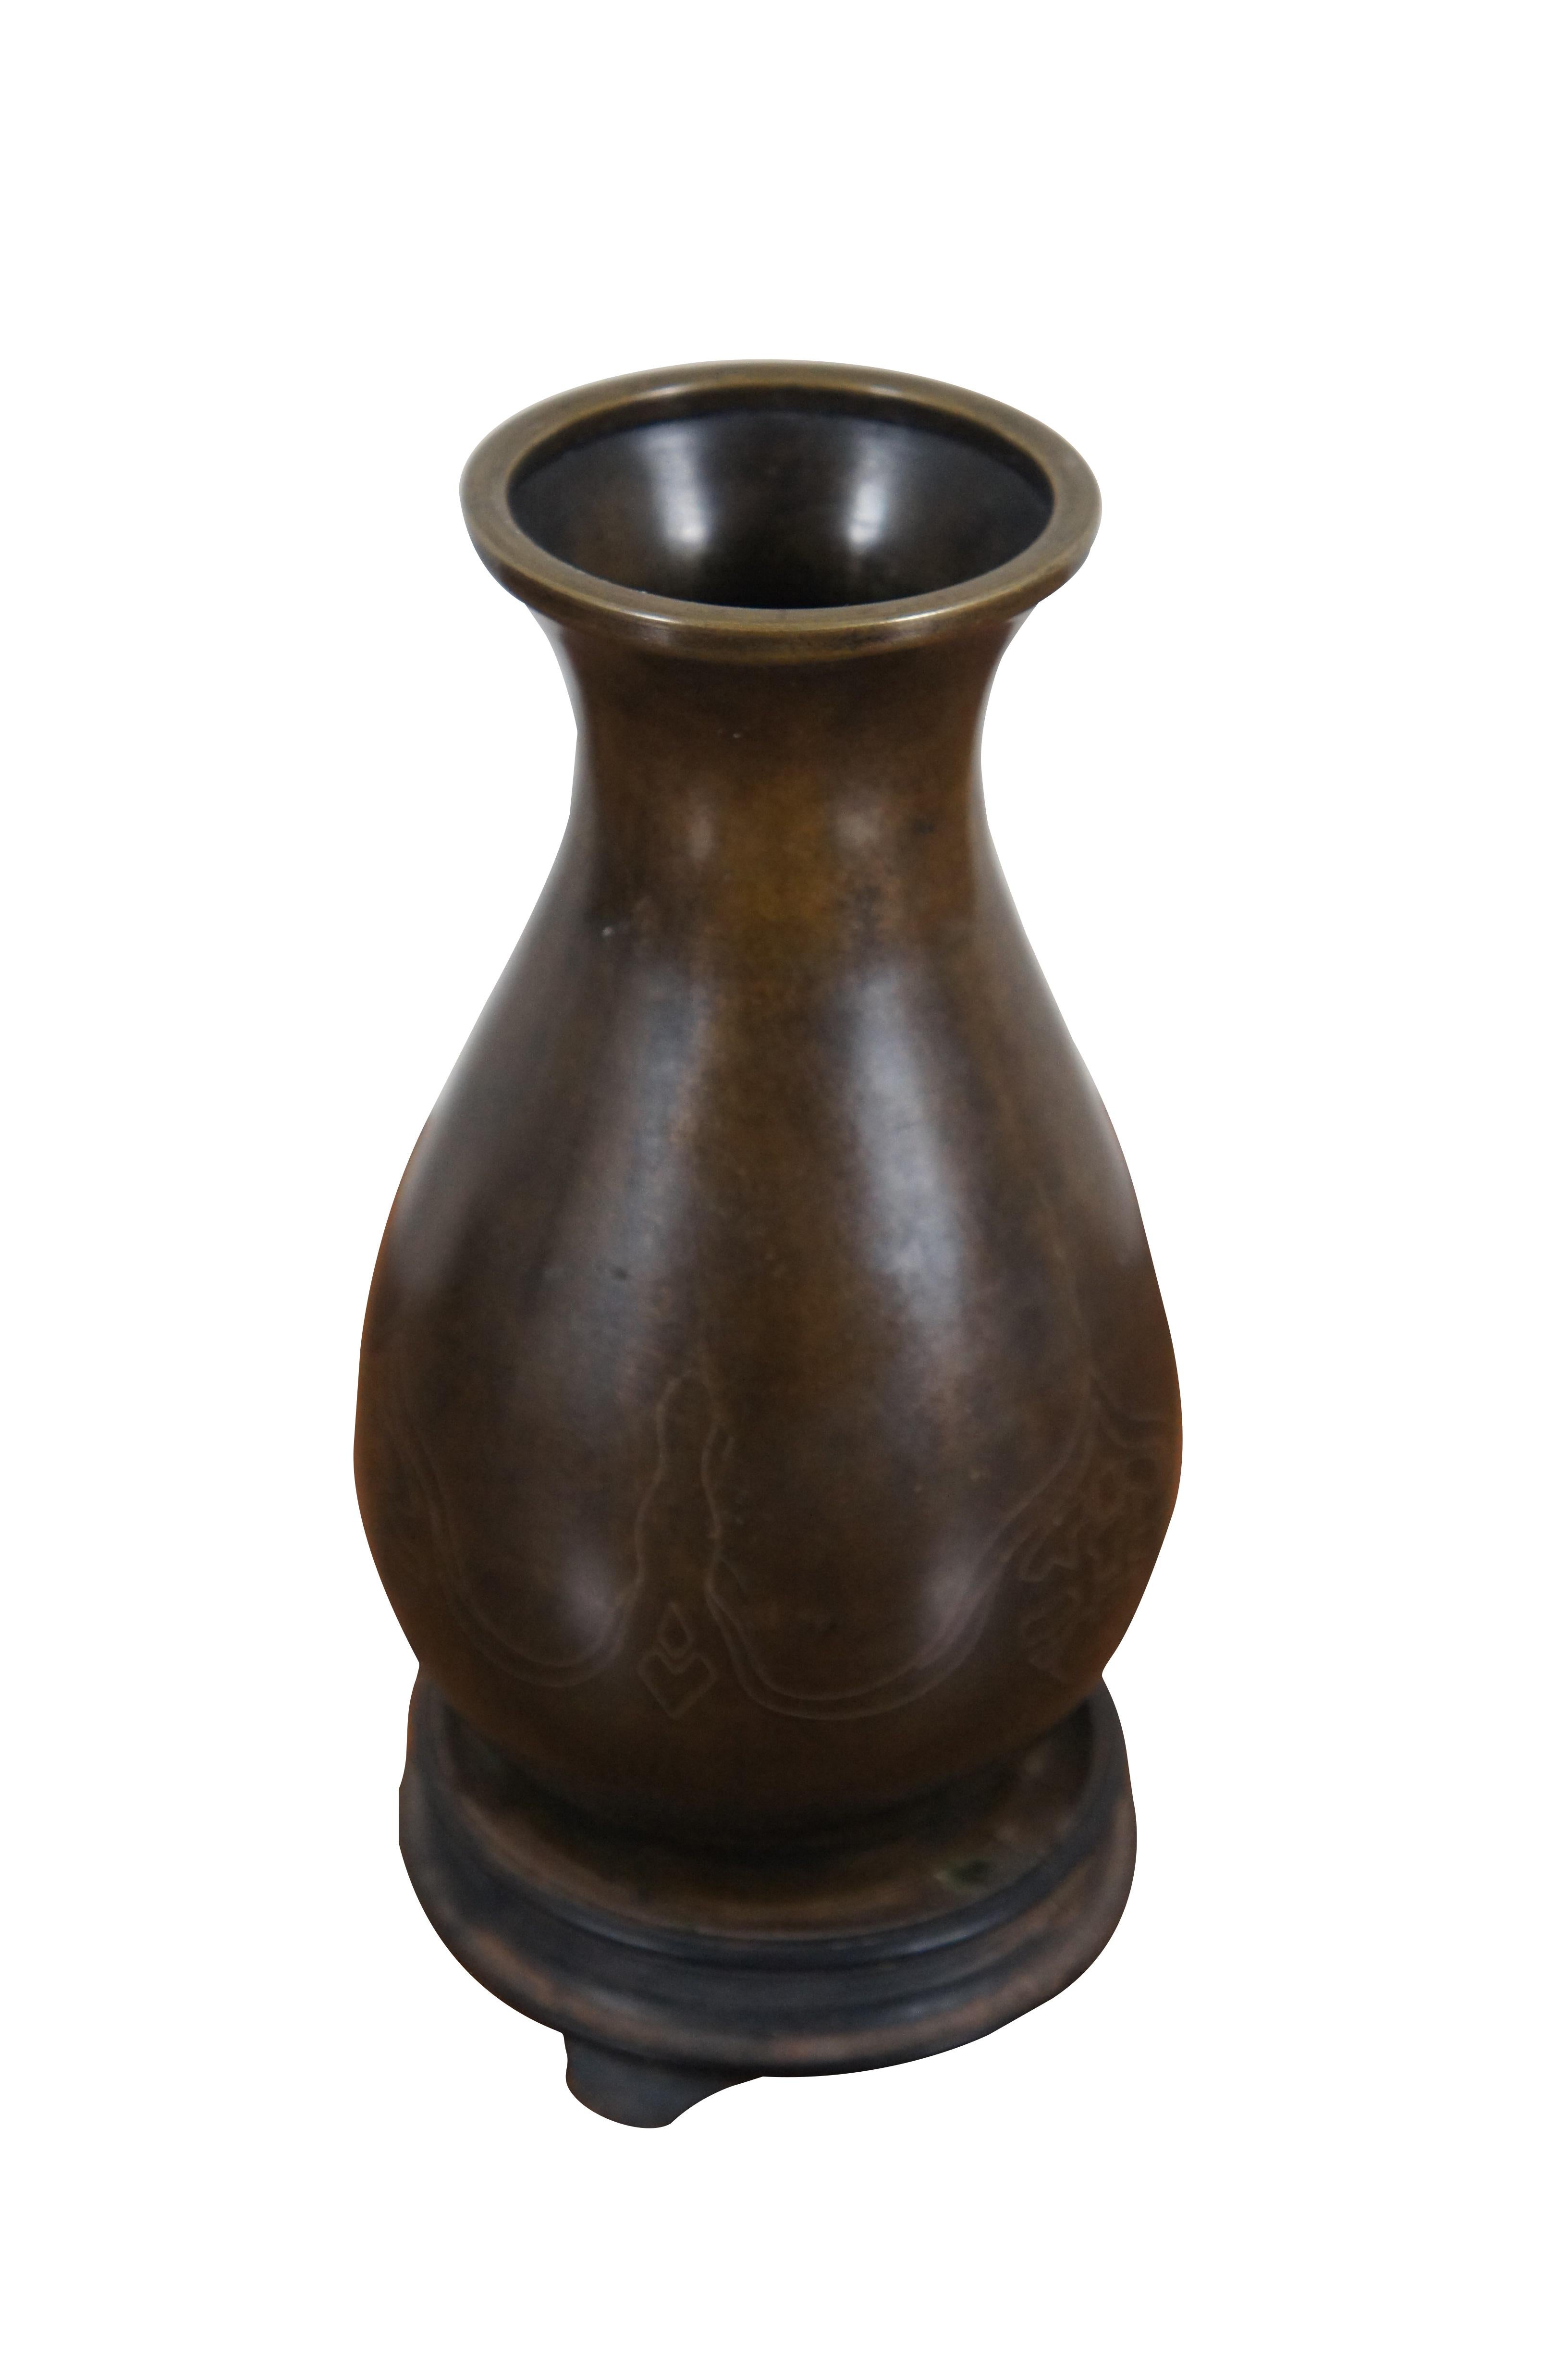 Antique silver wire inlaid bronze cloisonné vase. Features a slightly mottled brown finish with a simple sparse design in inlaid silver wire. Includes wooden stand.

Dimensions:
4.25